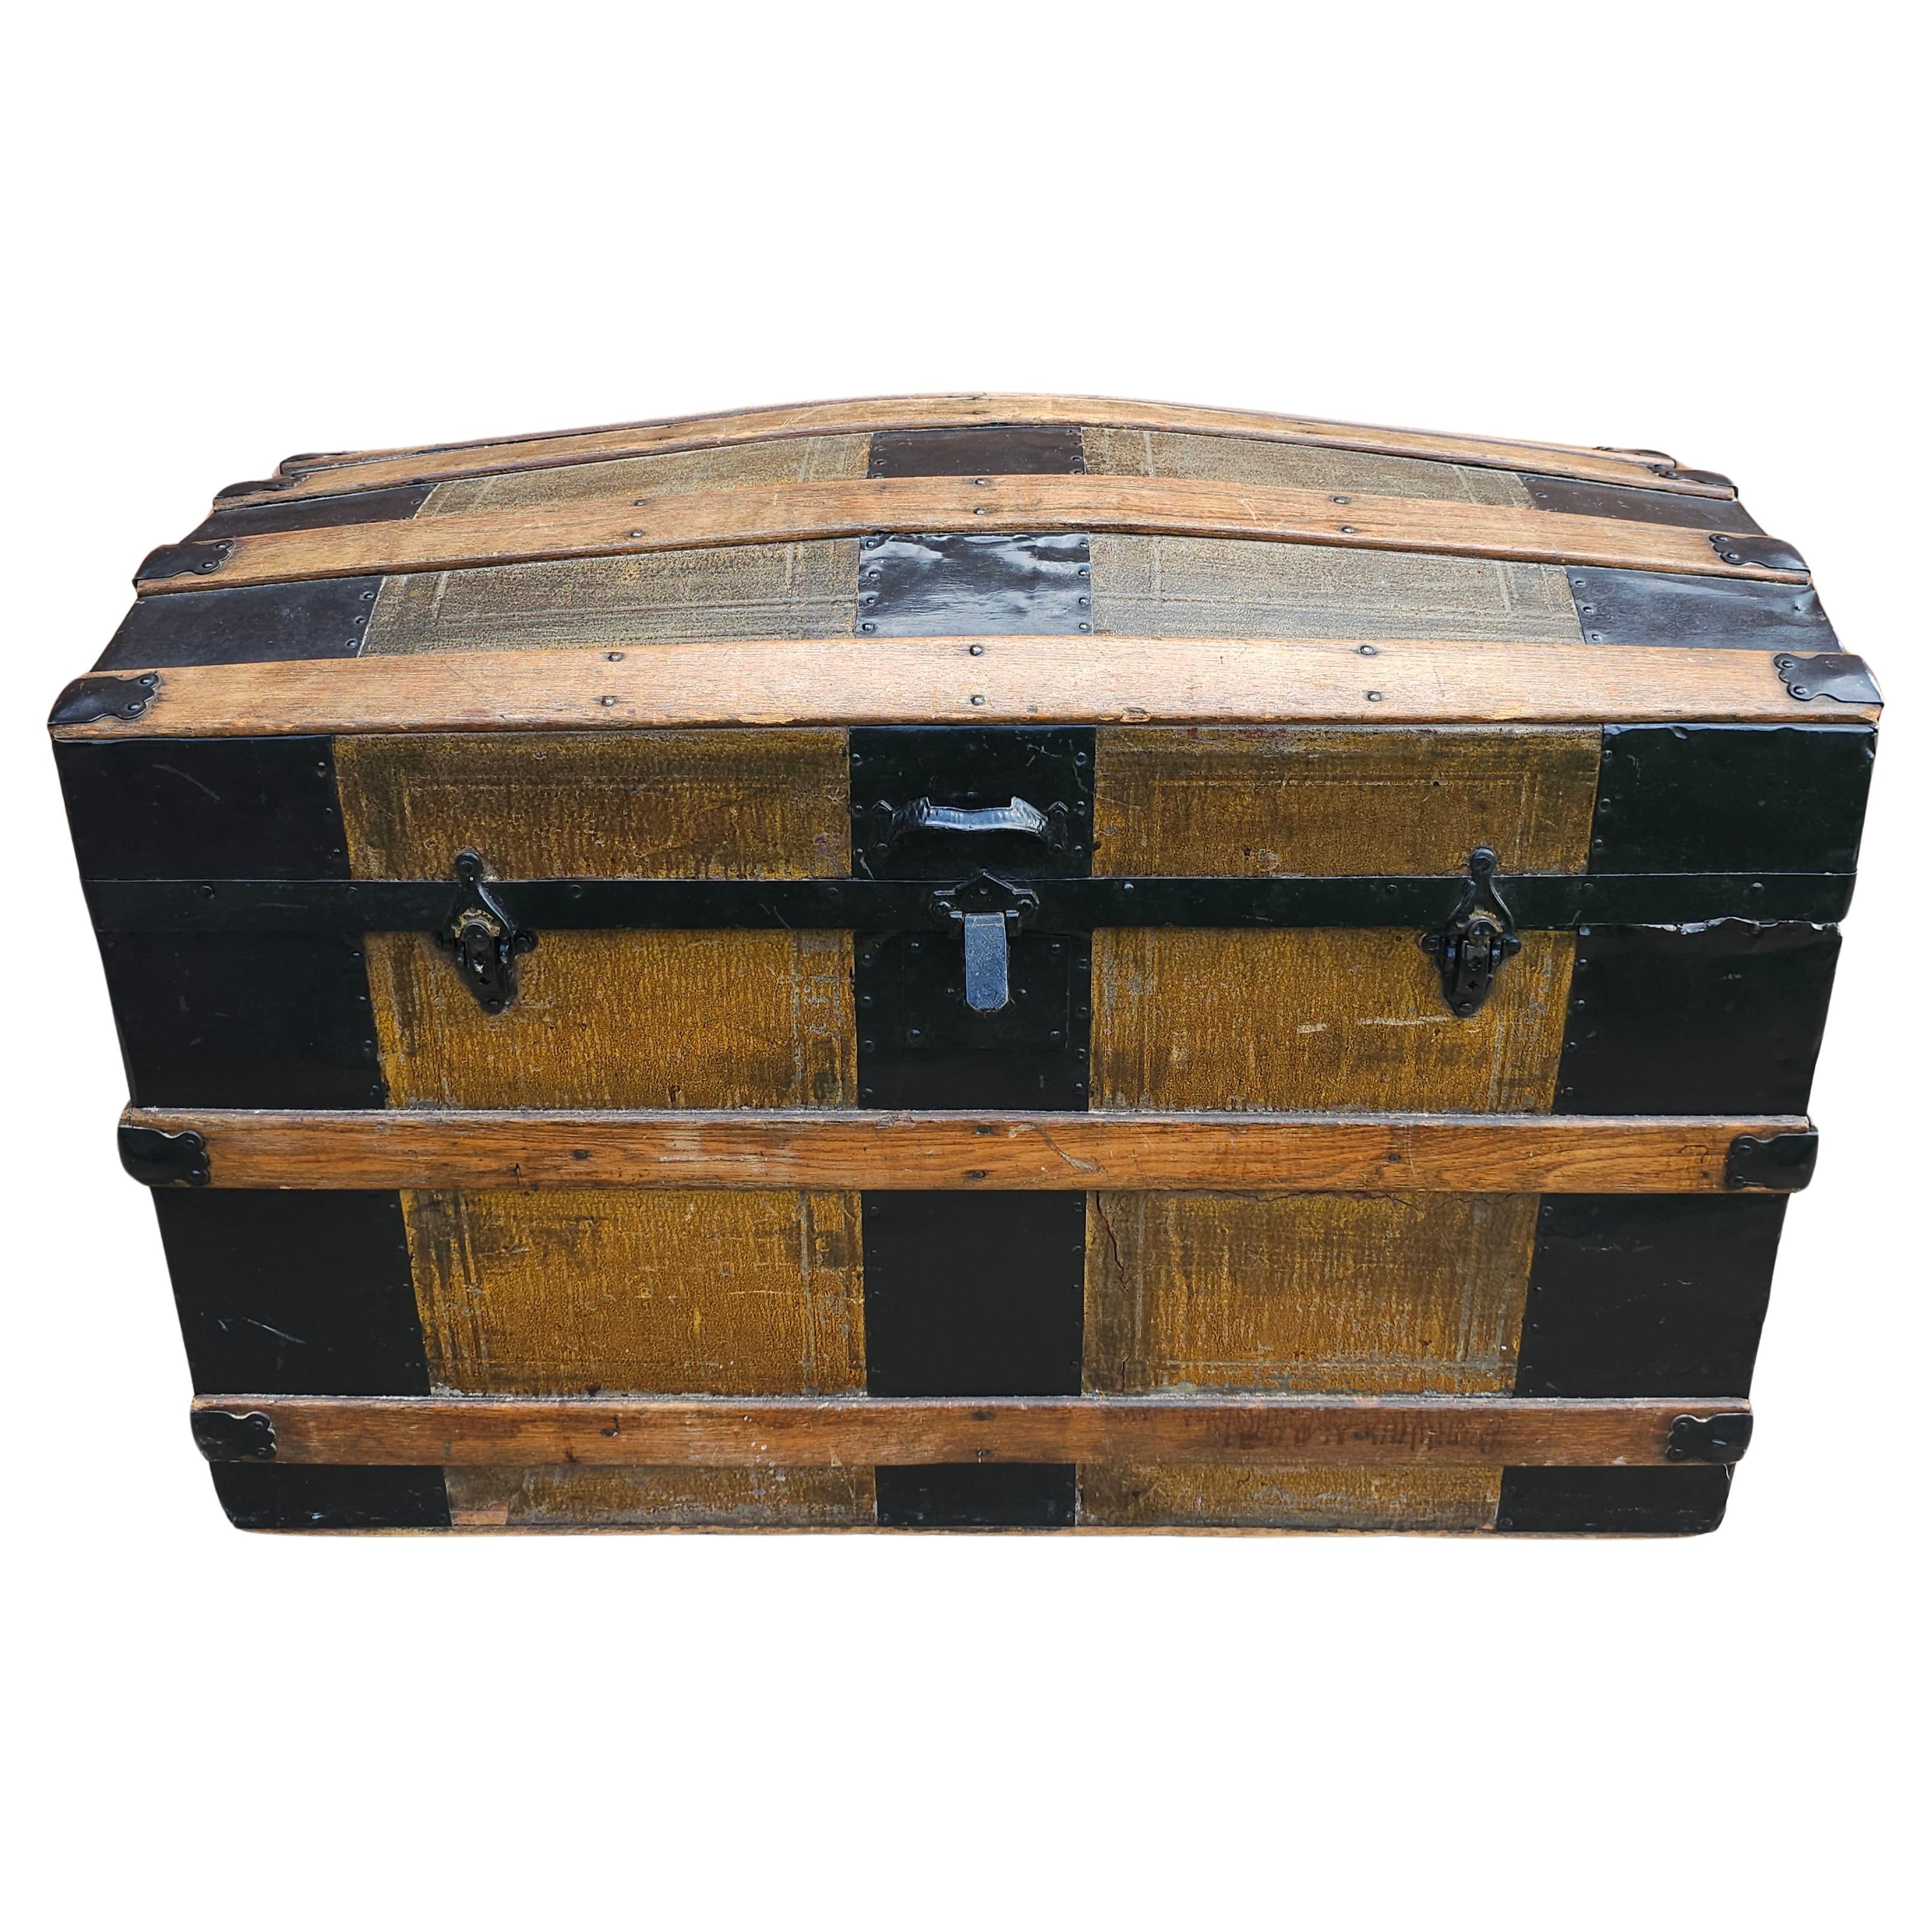 Early 20th C. American Dome Top Metal, Wood and Leather Steamer's Trunk